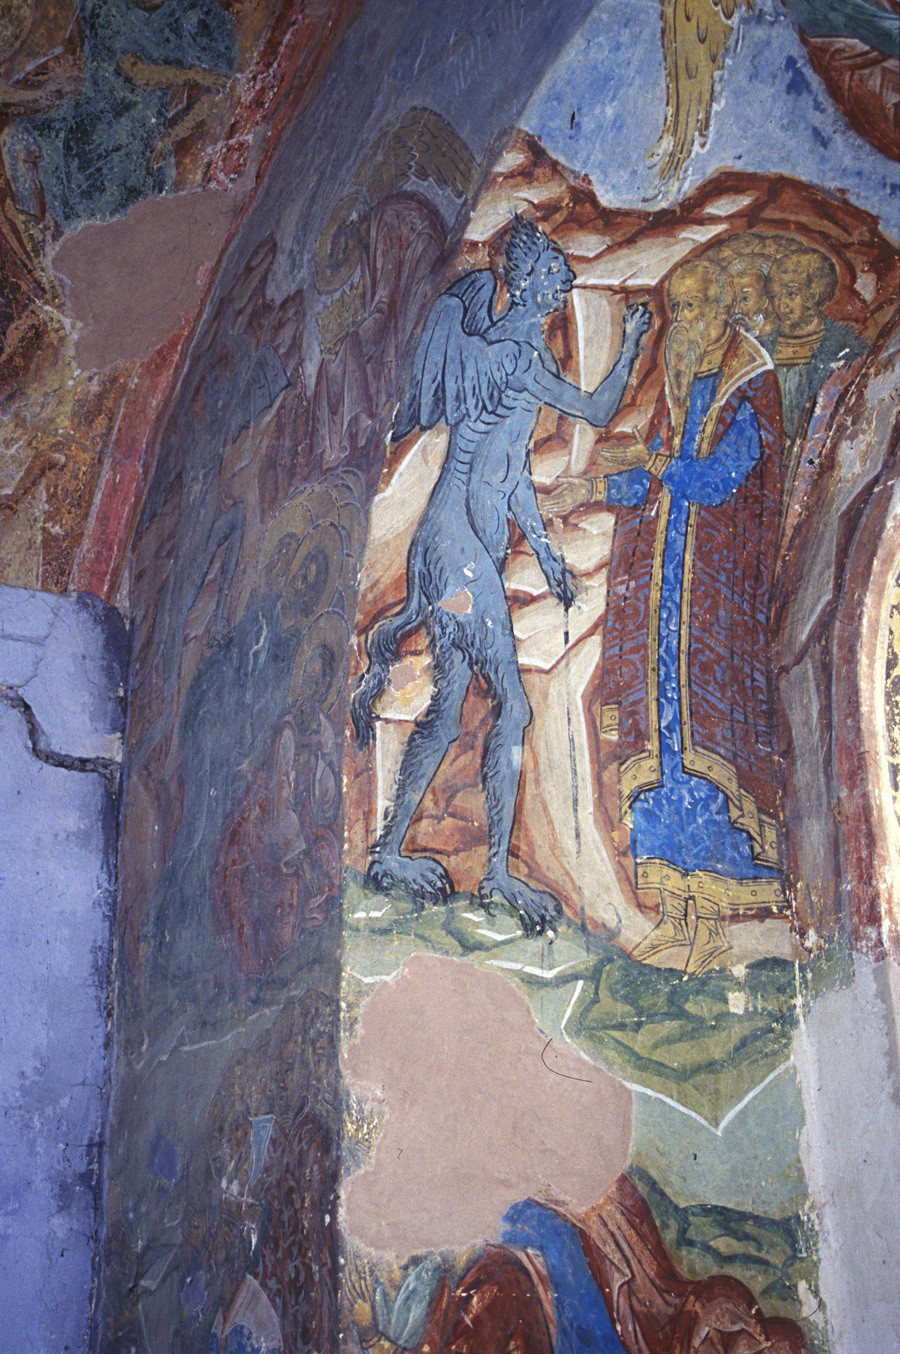 St. Kirill Belozersk Monastery. Dormition Cathedral, north gallery. North wall window embrasure with fresco of devil making mark of Antichrist on forehead of adherents. April 1, 2001.